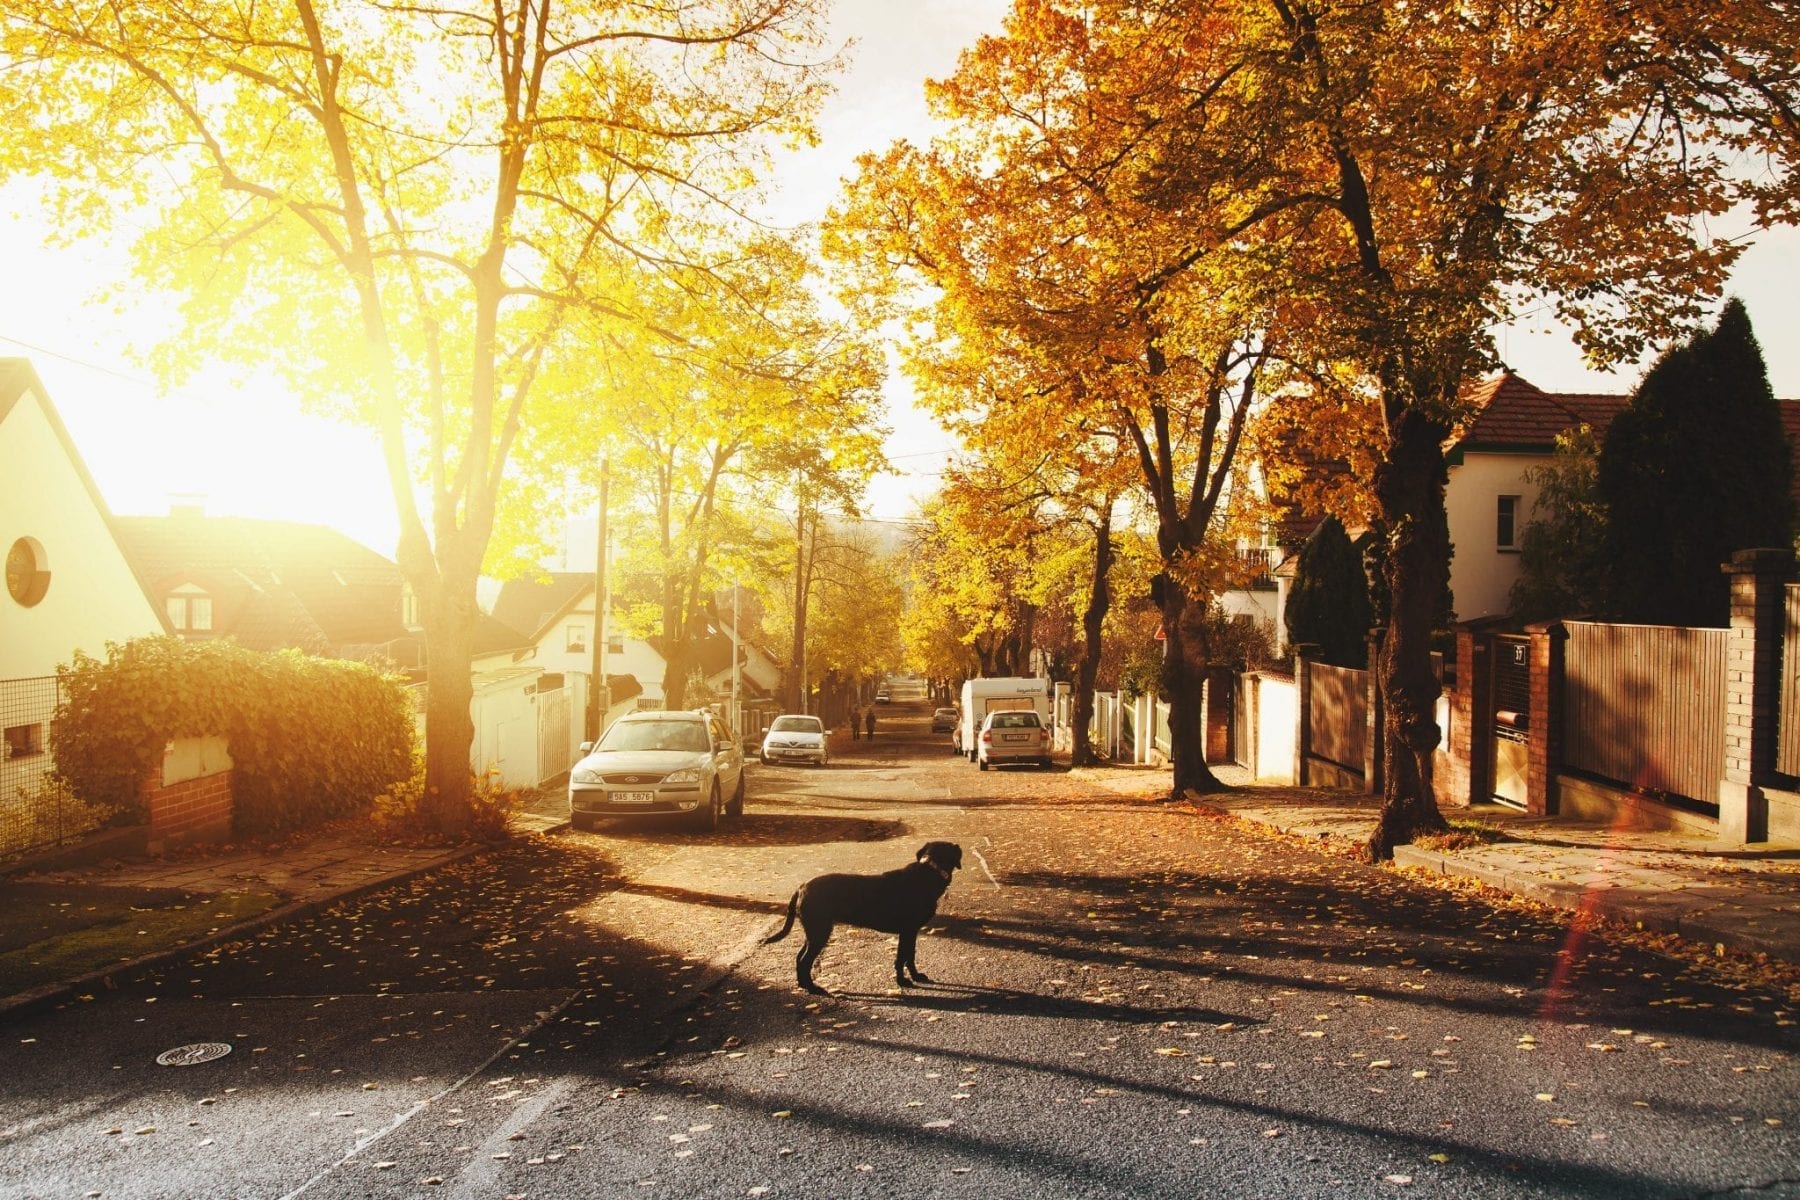 Dog in middle of street during fall